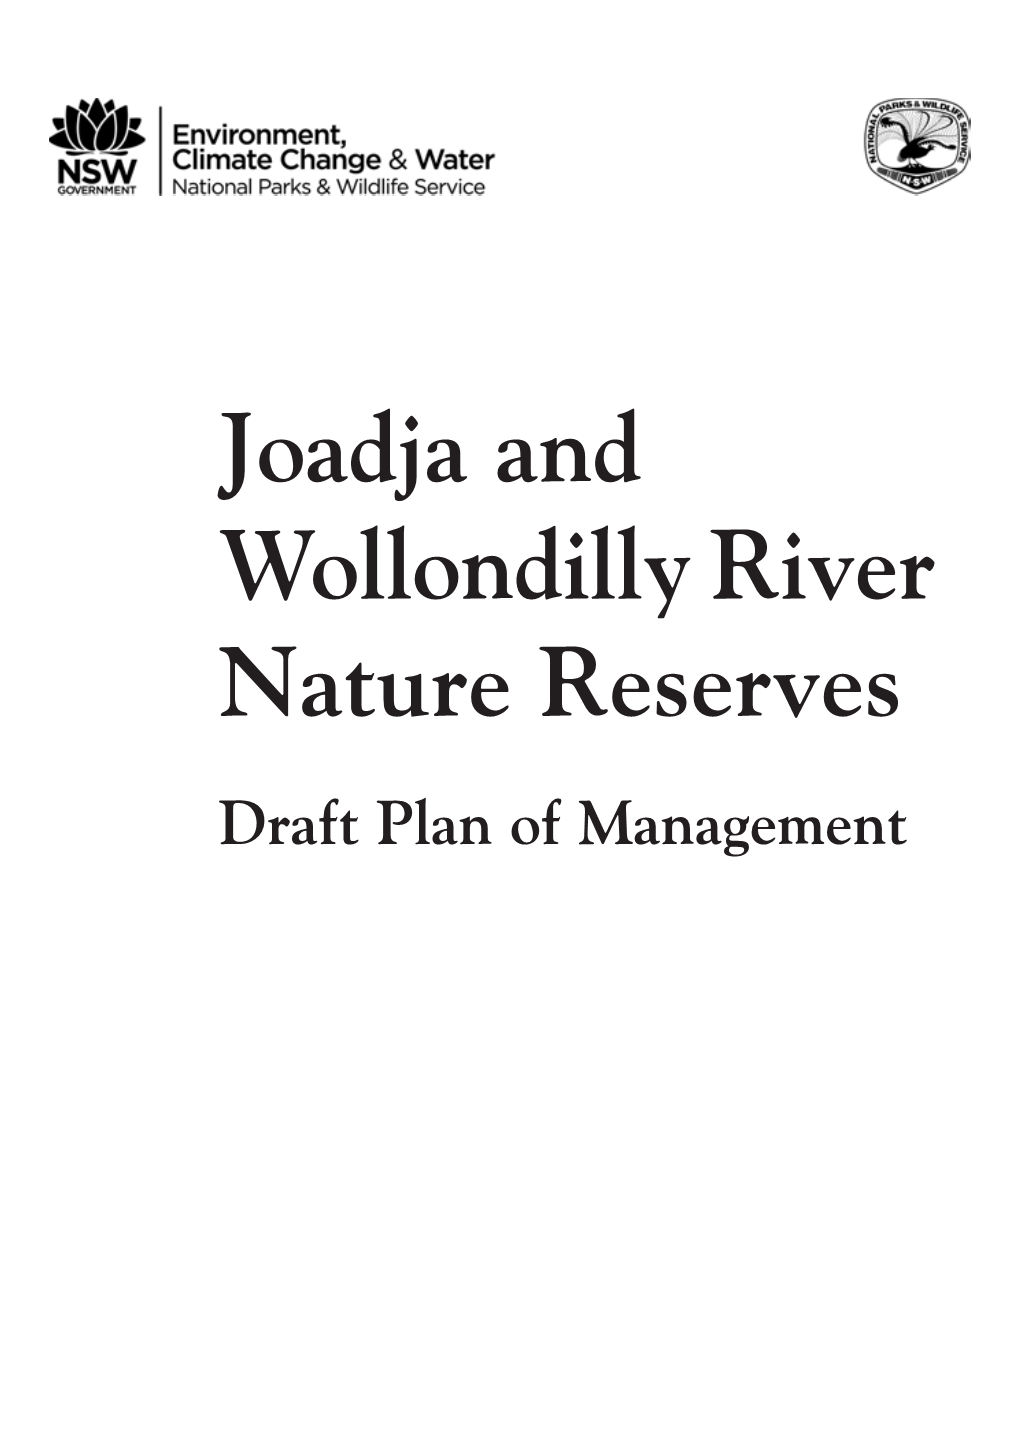 Joadja and Wollondilly River Nature Reserves